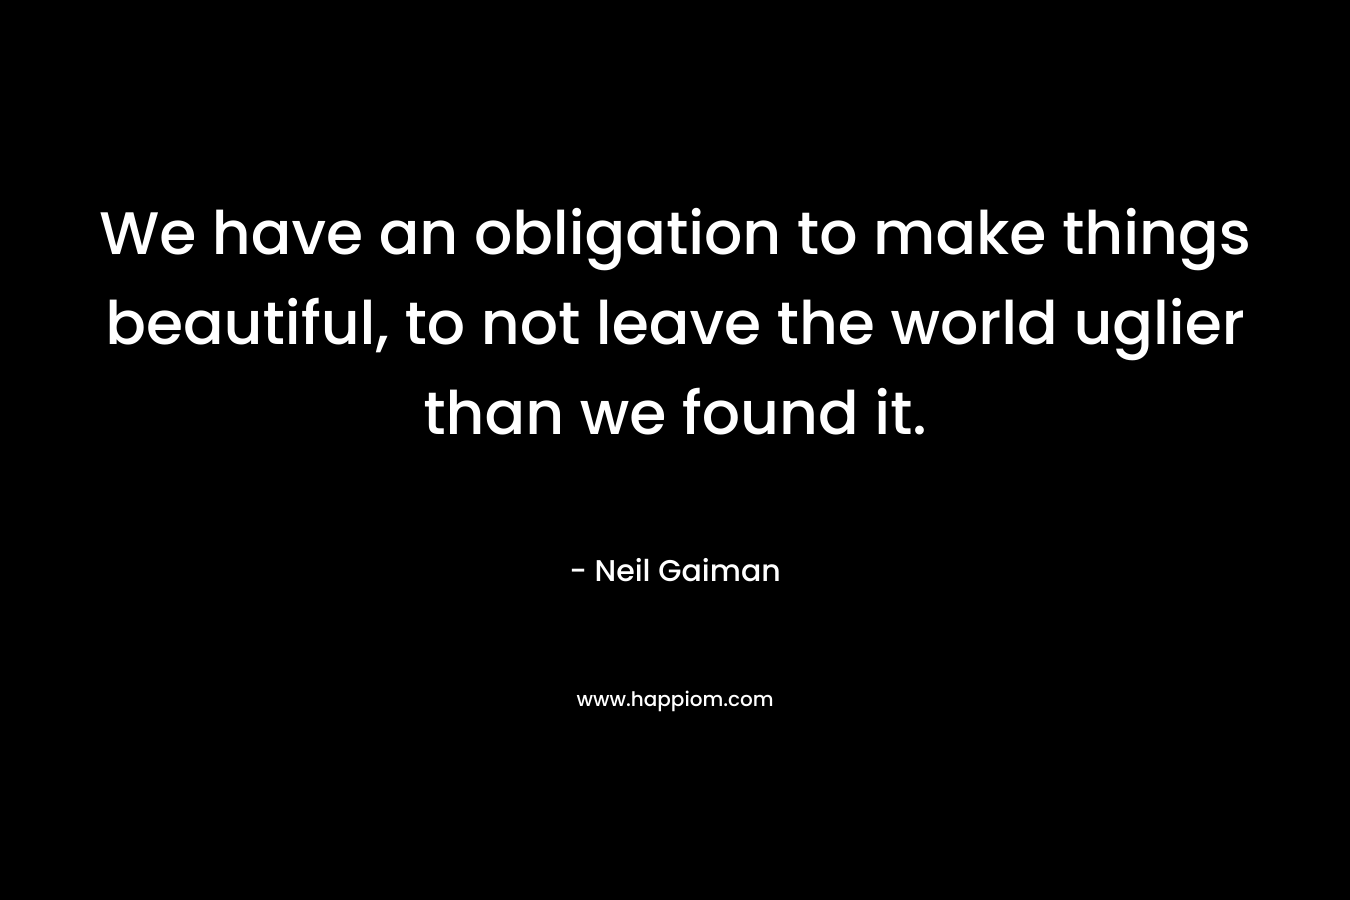 We have an obligation to make things beautiful, to not leave the world uglier than we found it.